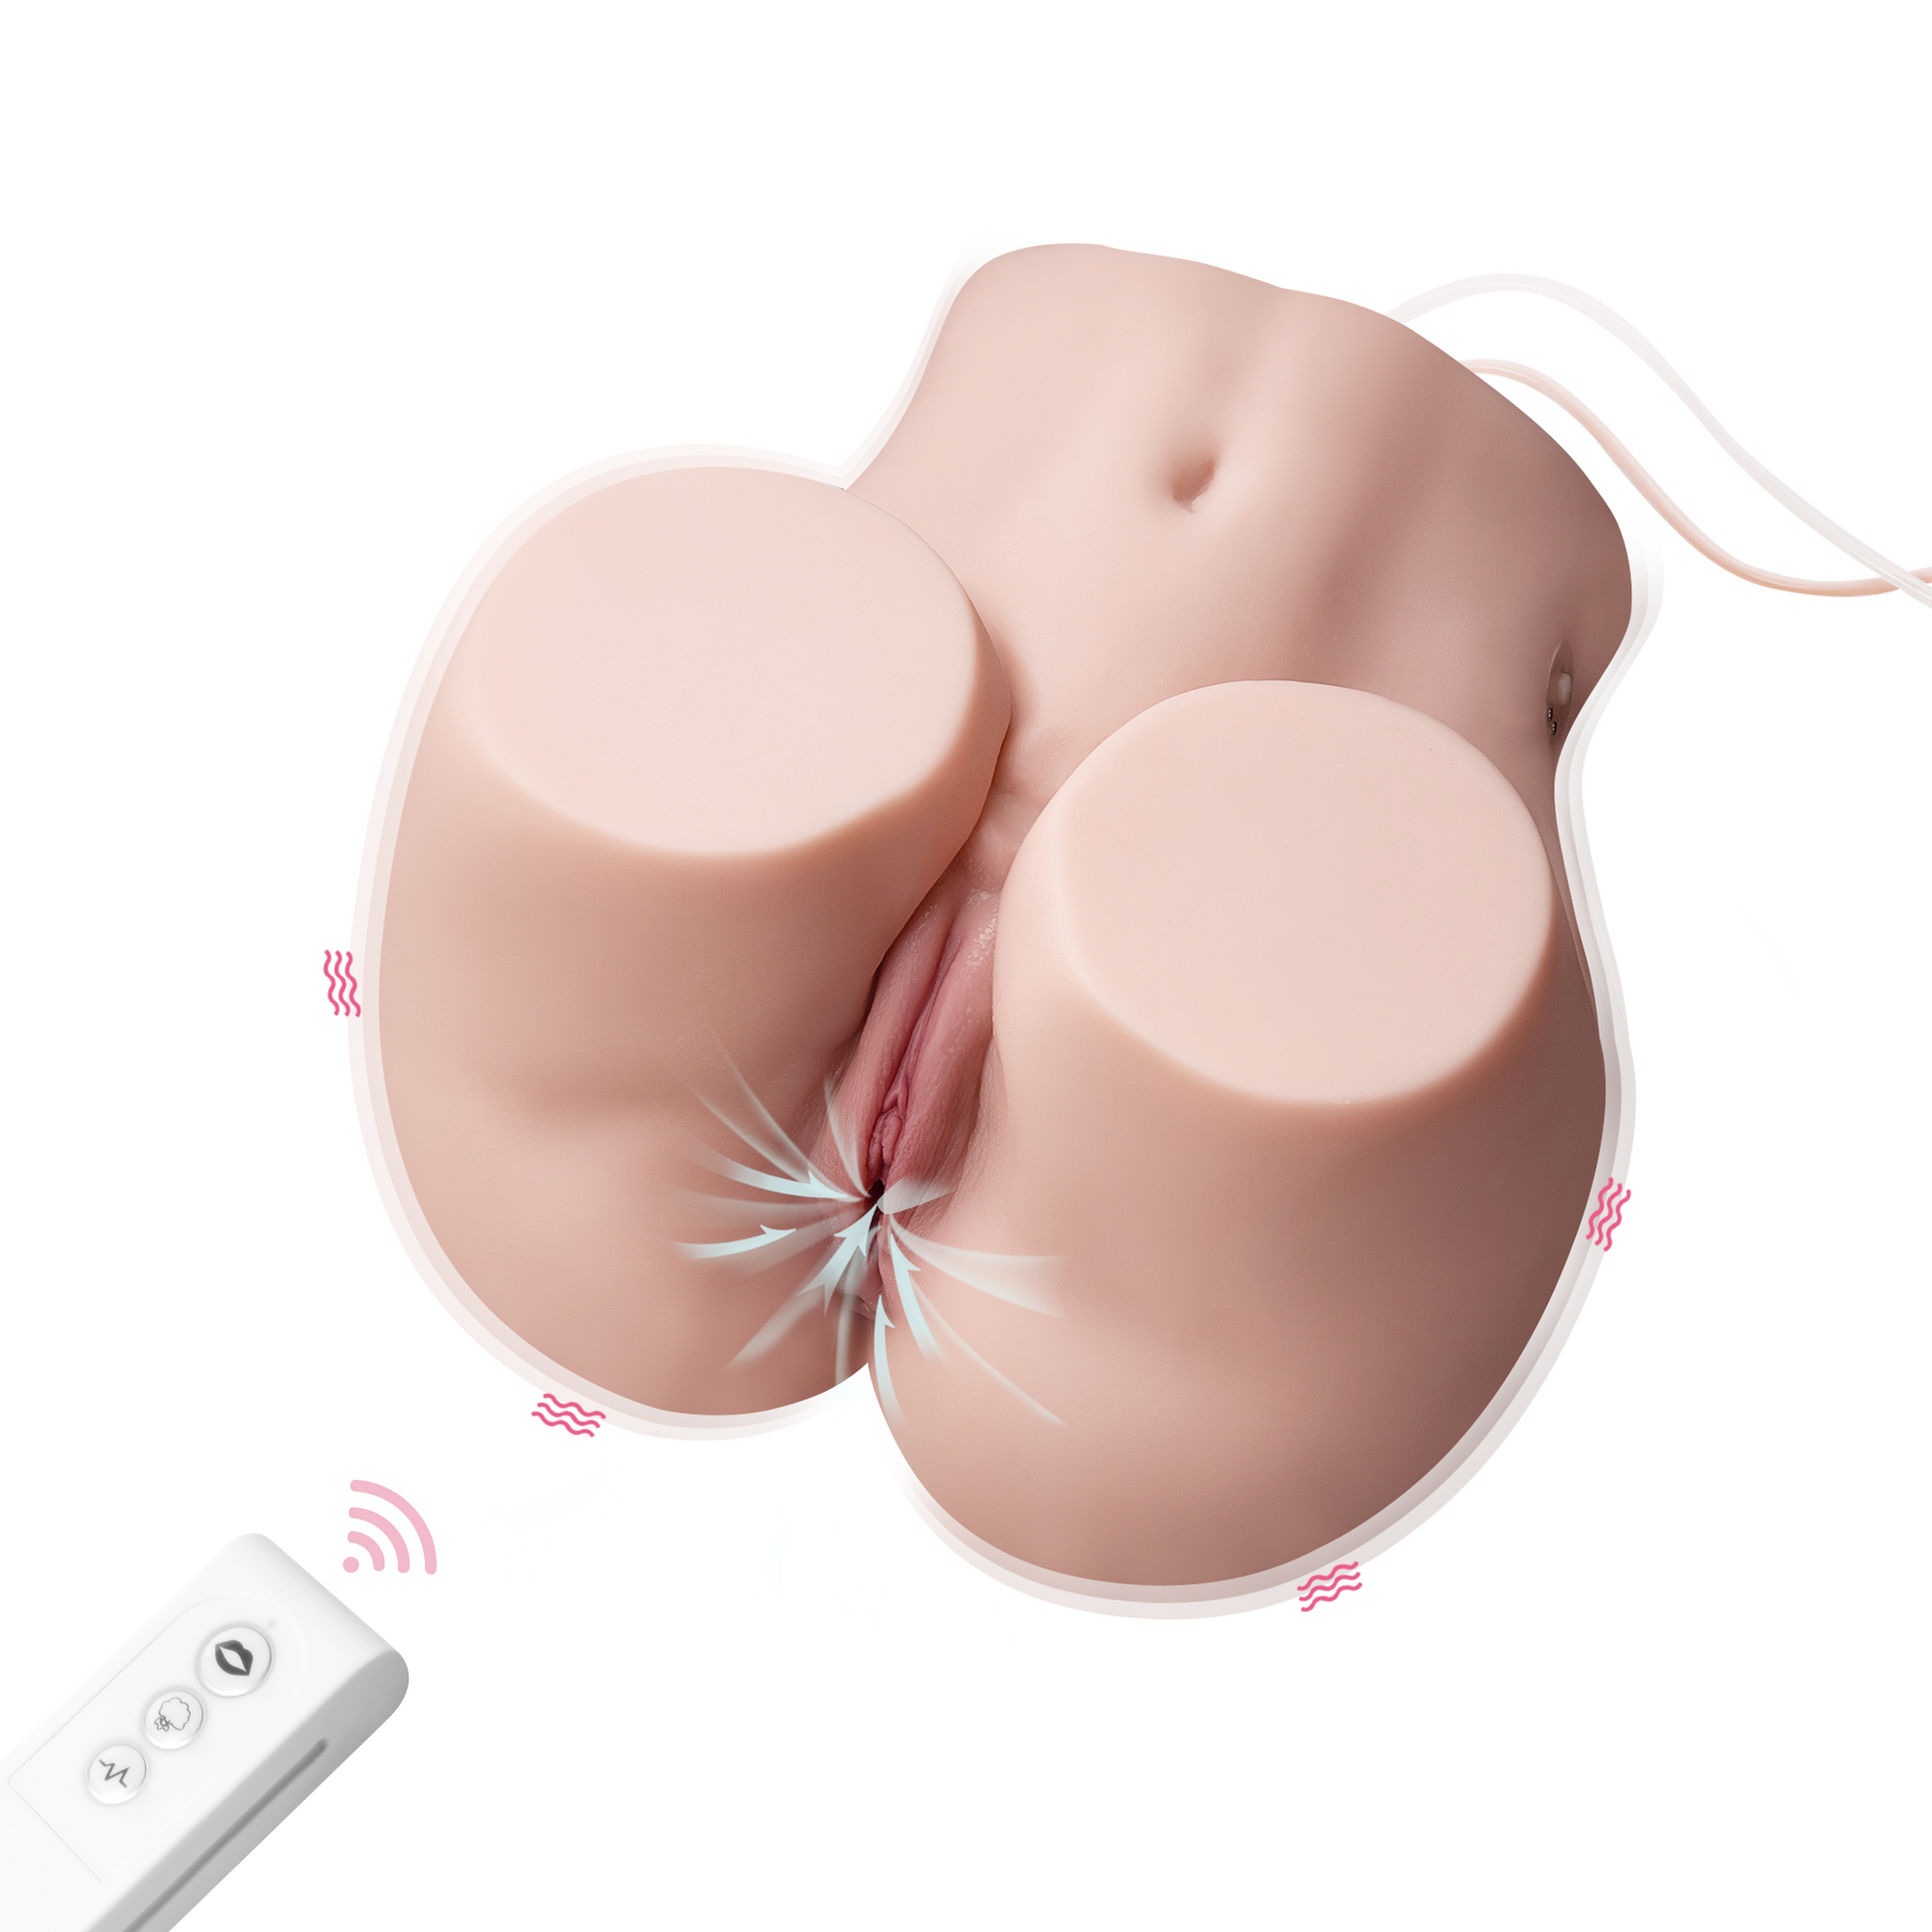 13.22LB Automatic Ass Sex Doll Male Masturbator -  Lifelike Sucking & Vibration Sex Doll with Tight Vagina Anal Canal, Automatic Cleaning, Adult Sex Toy for Men Masturbation Sex Toys  - HiREALOVE Official Store